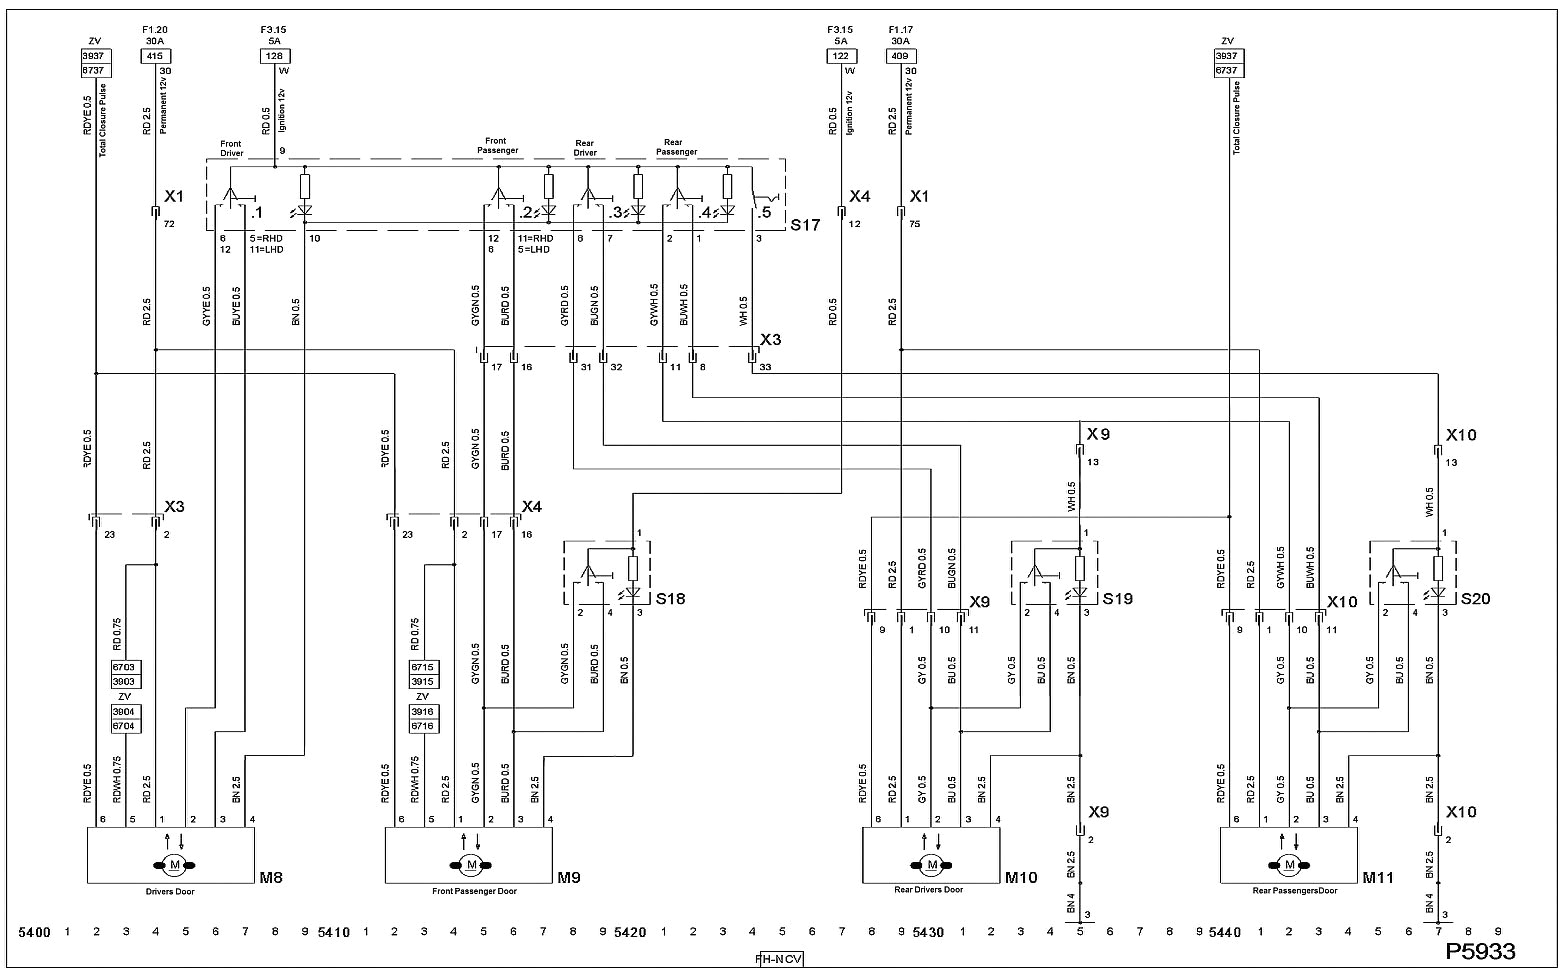 vauxhall tow bar wiring diagram my wiring diagramopel zafira wiring diagram wiring diagram perfomance vauxhall tow